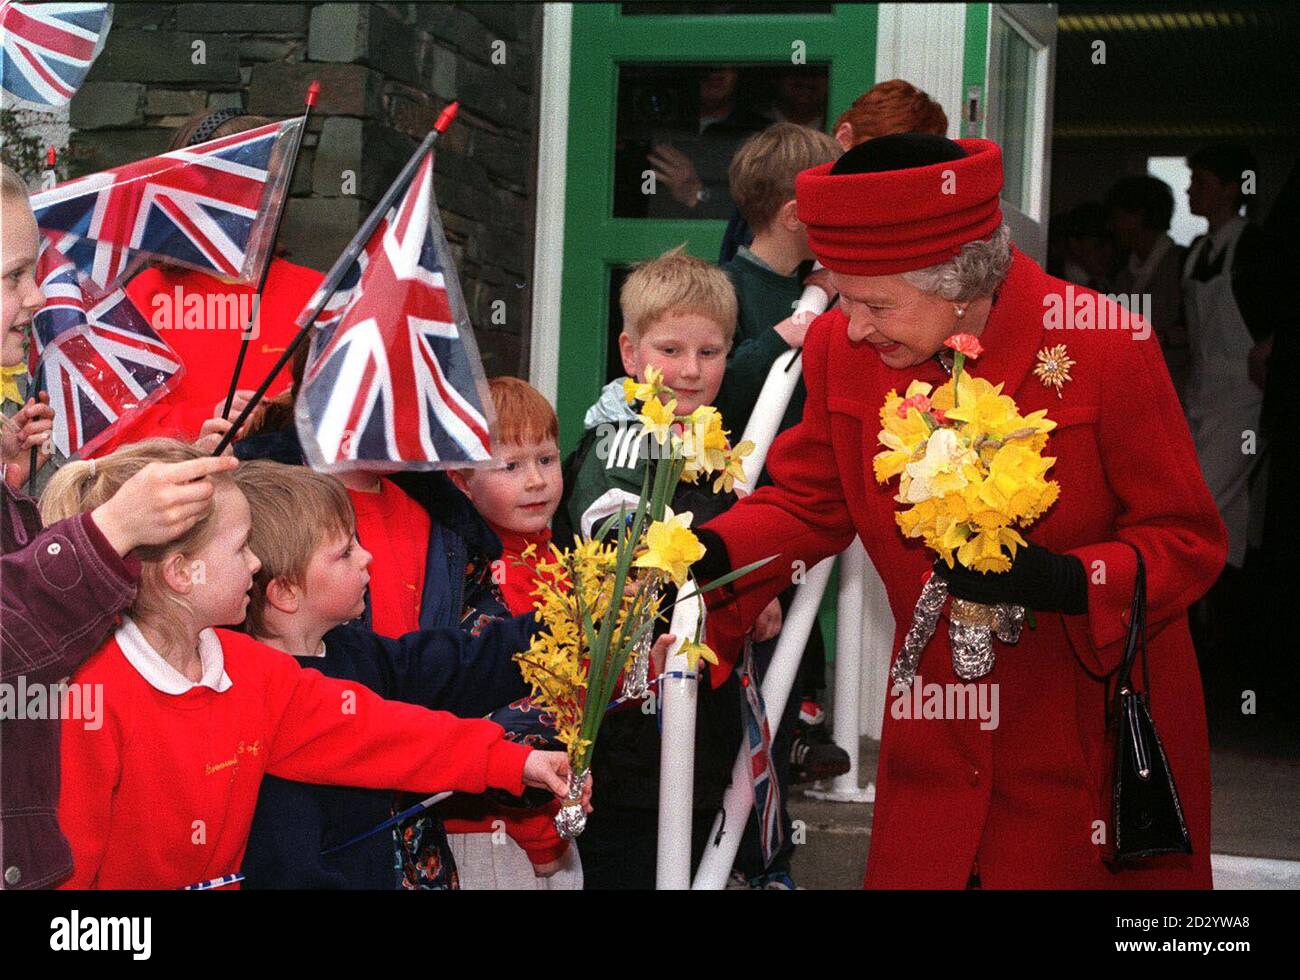 PA NEWS 20/3/98 THE QUEEN RECEIVES FLOWERS DURING A VISIT TO KESWICK SCHOOL IN CUMBRIA. Stock Photo